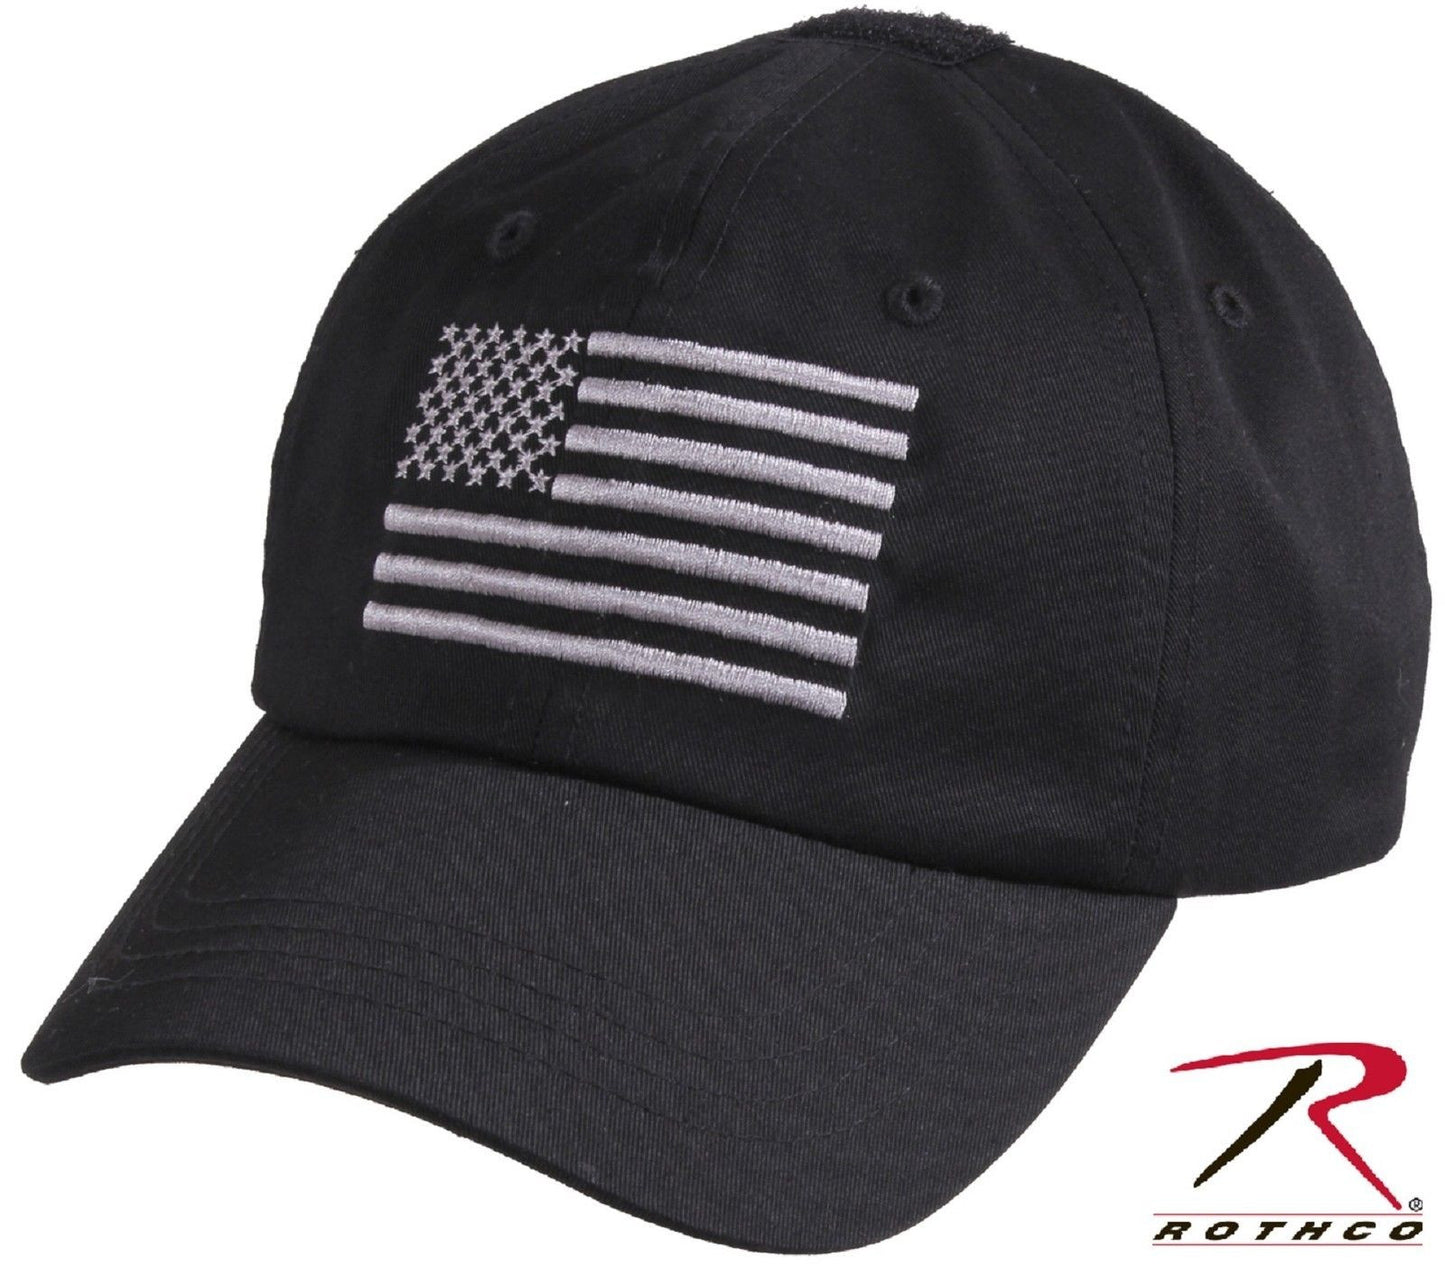 Black & Silver USA Flag Tactical Operator Cap - Embroidered American Flag Hat